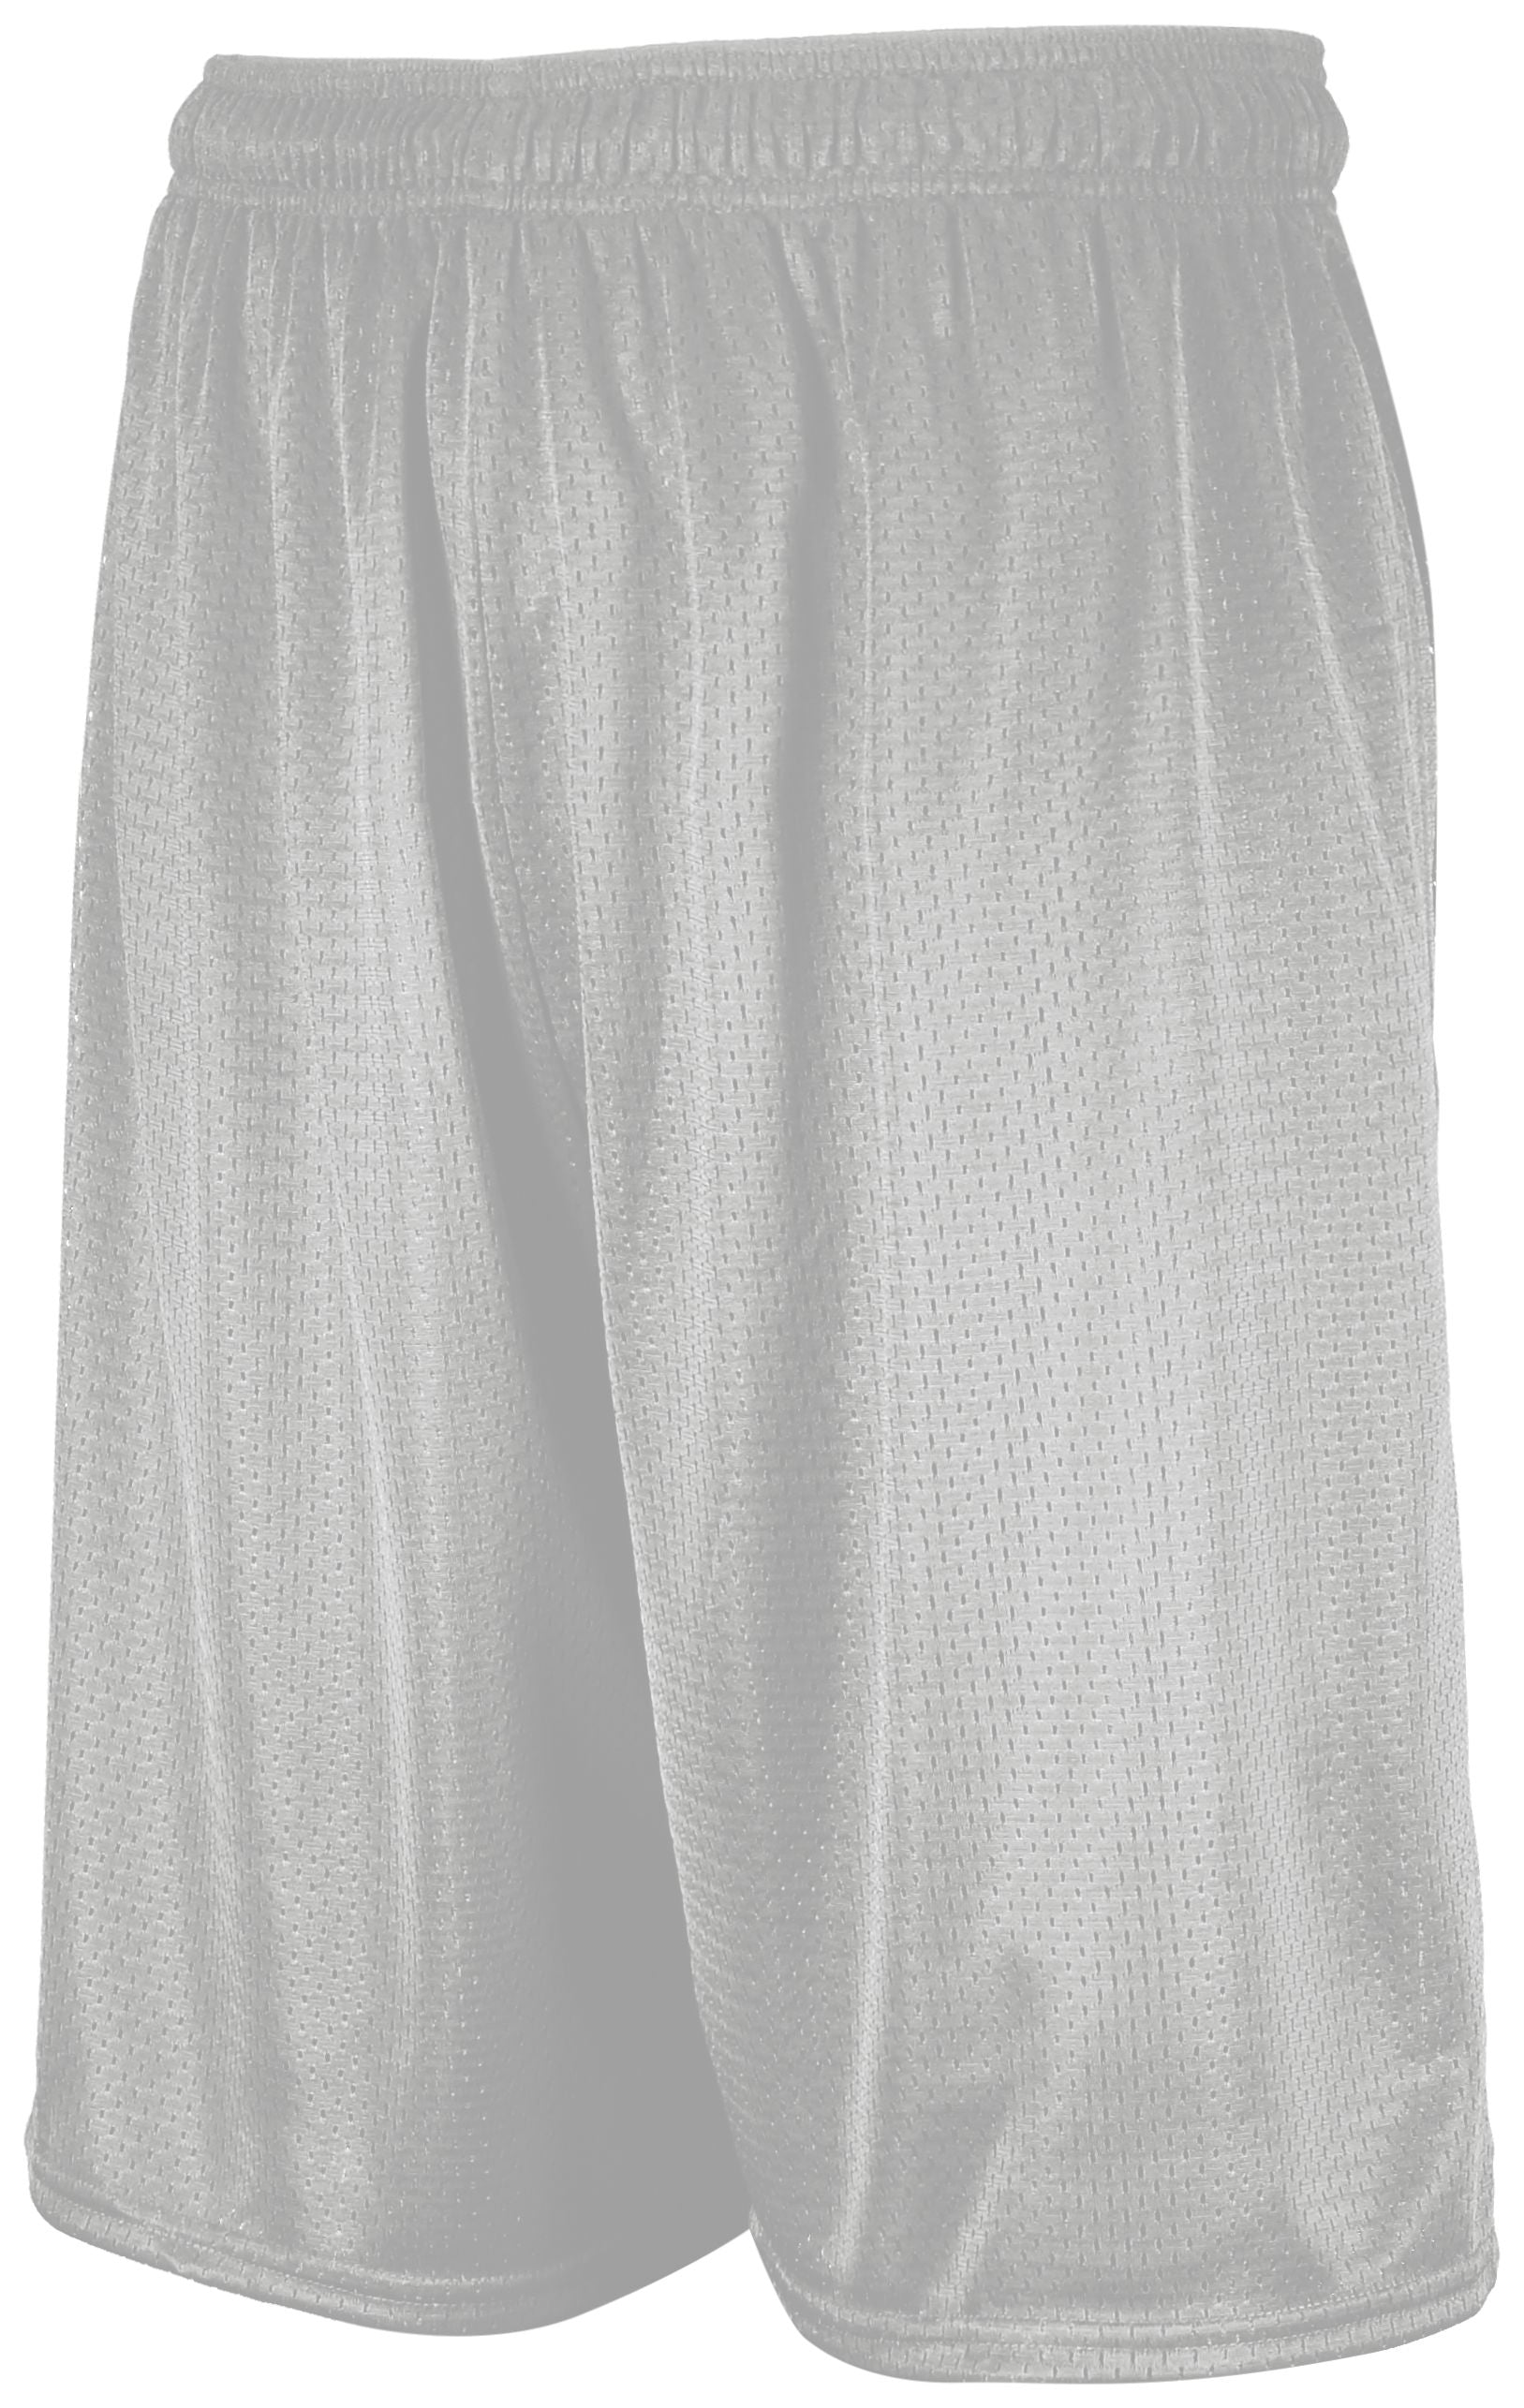 Russell Athletic Dri-Power Mesh Shorts in Gridiron Silver  -Part of the Adult, Adult-Shorts, Russell-Athletic-Products product lines at KanaleyCreations.com